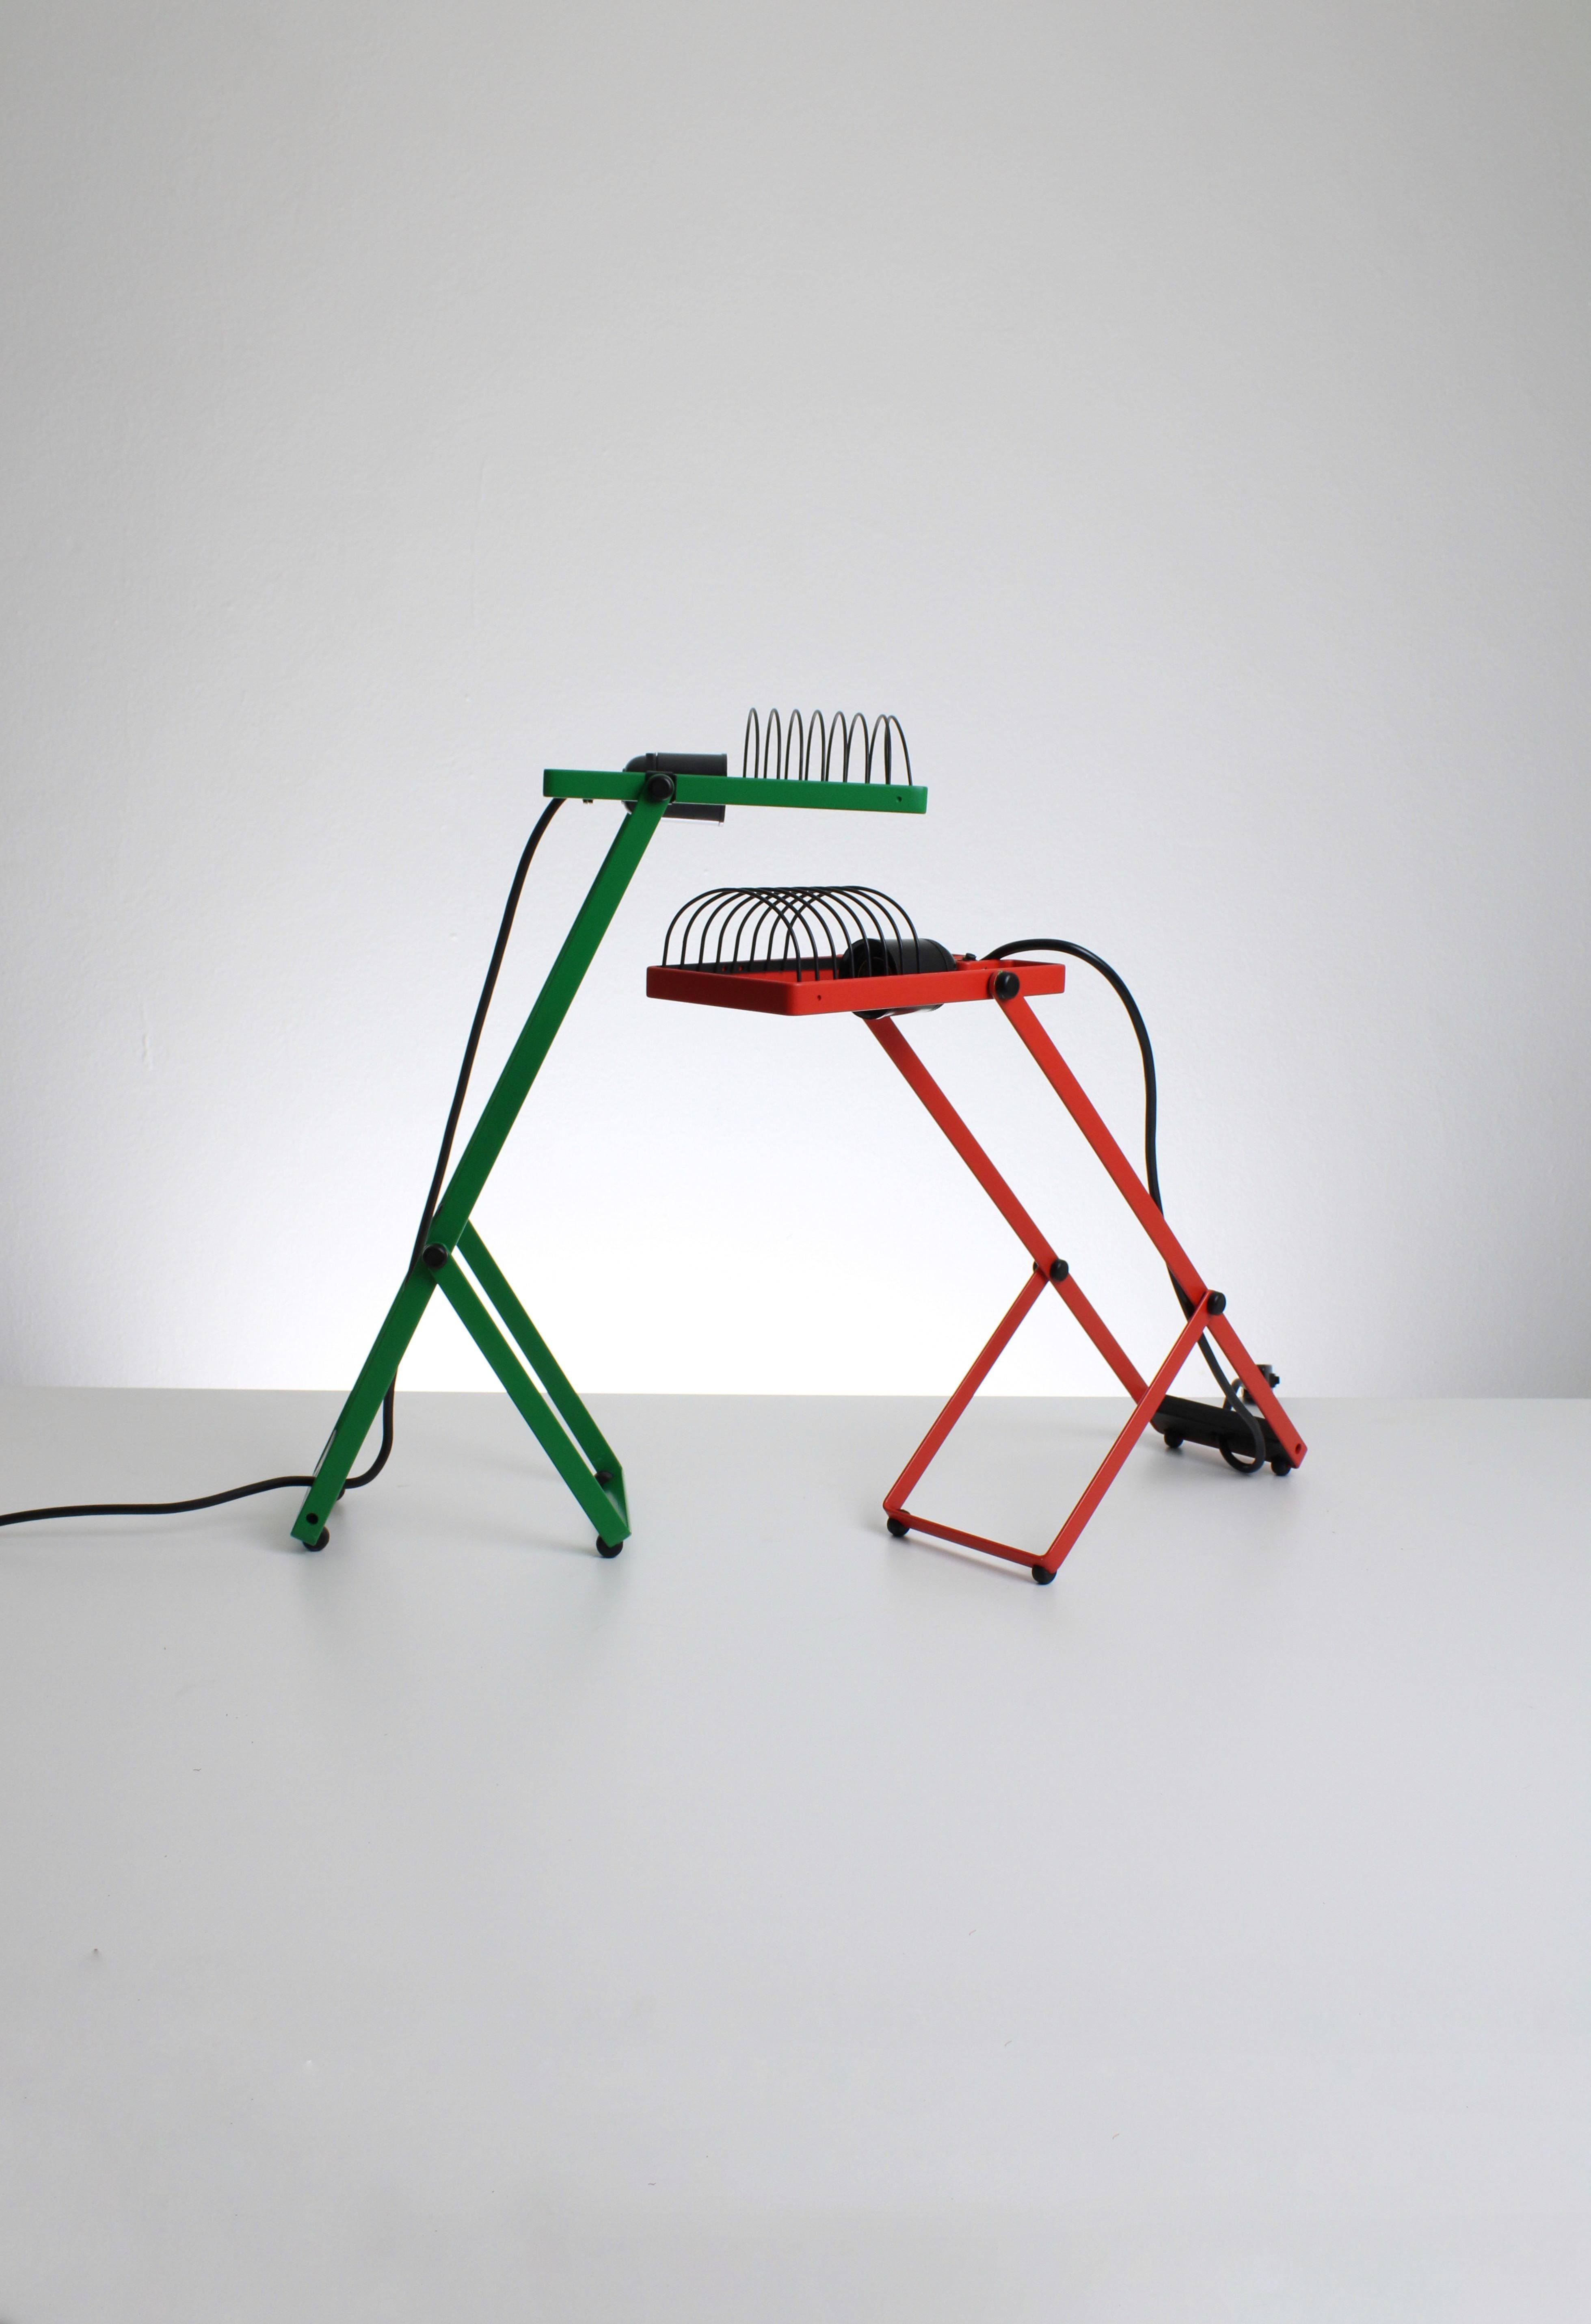 Set of two Sintesi desk lamps. Designed by Ernesto Gismondi for Artemide in the 1960s. Both of the lamps are from the first edition. New old stock including original box. This set includes an orange and green desk lamp. 

Both lamps are equipped